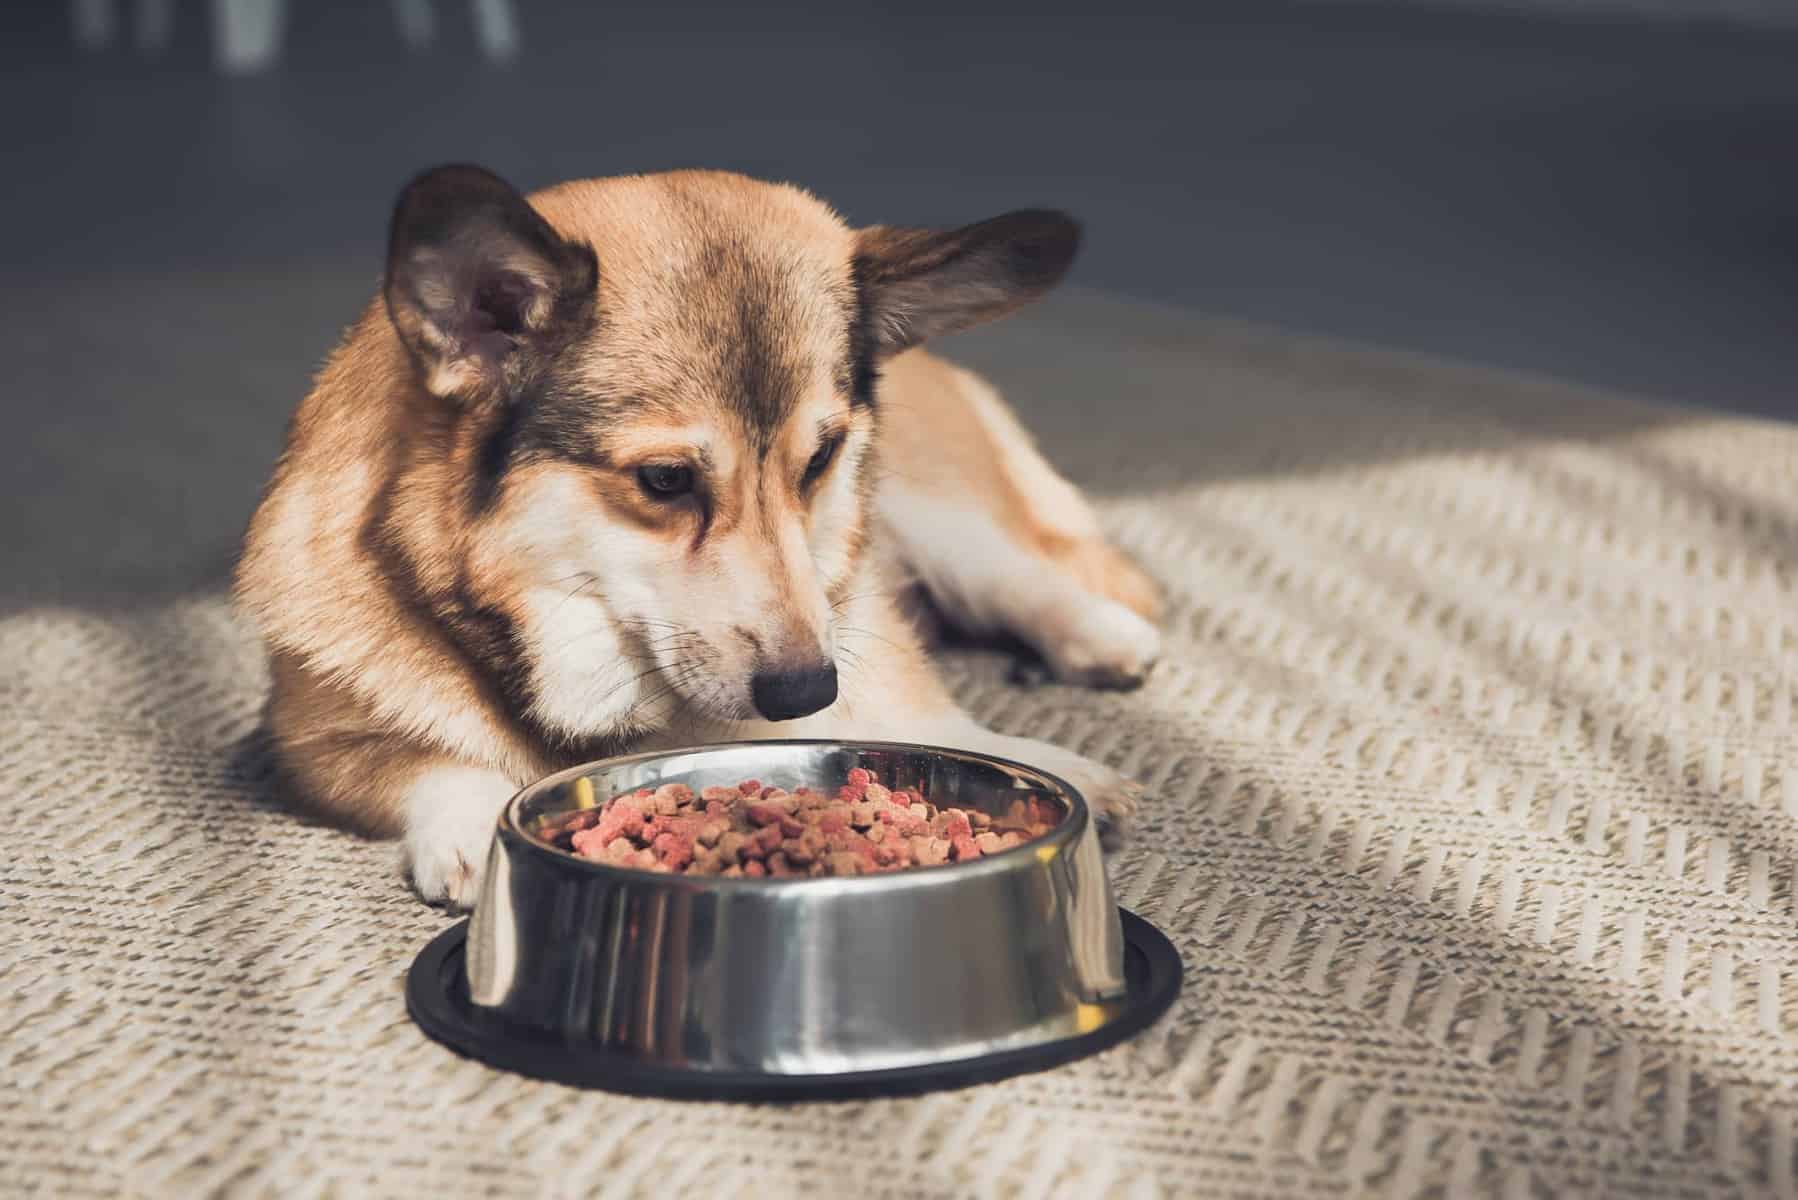 Your Dog Ate Betta Fish Food: Should You Be Concerned?